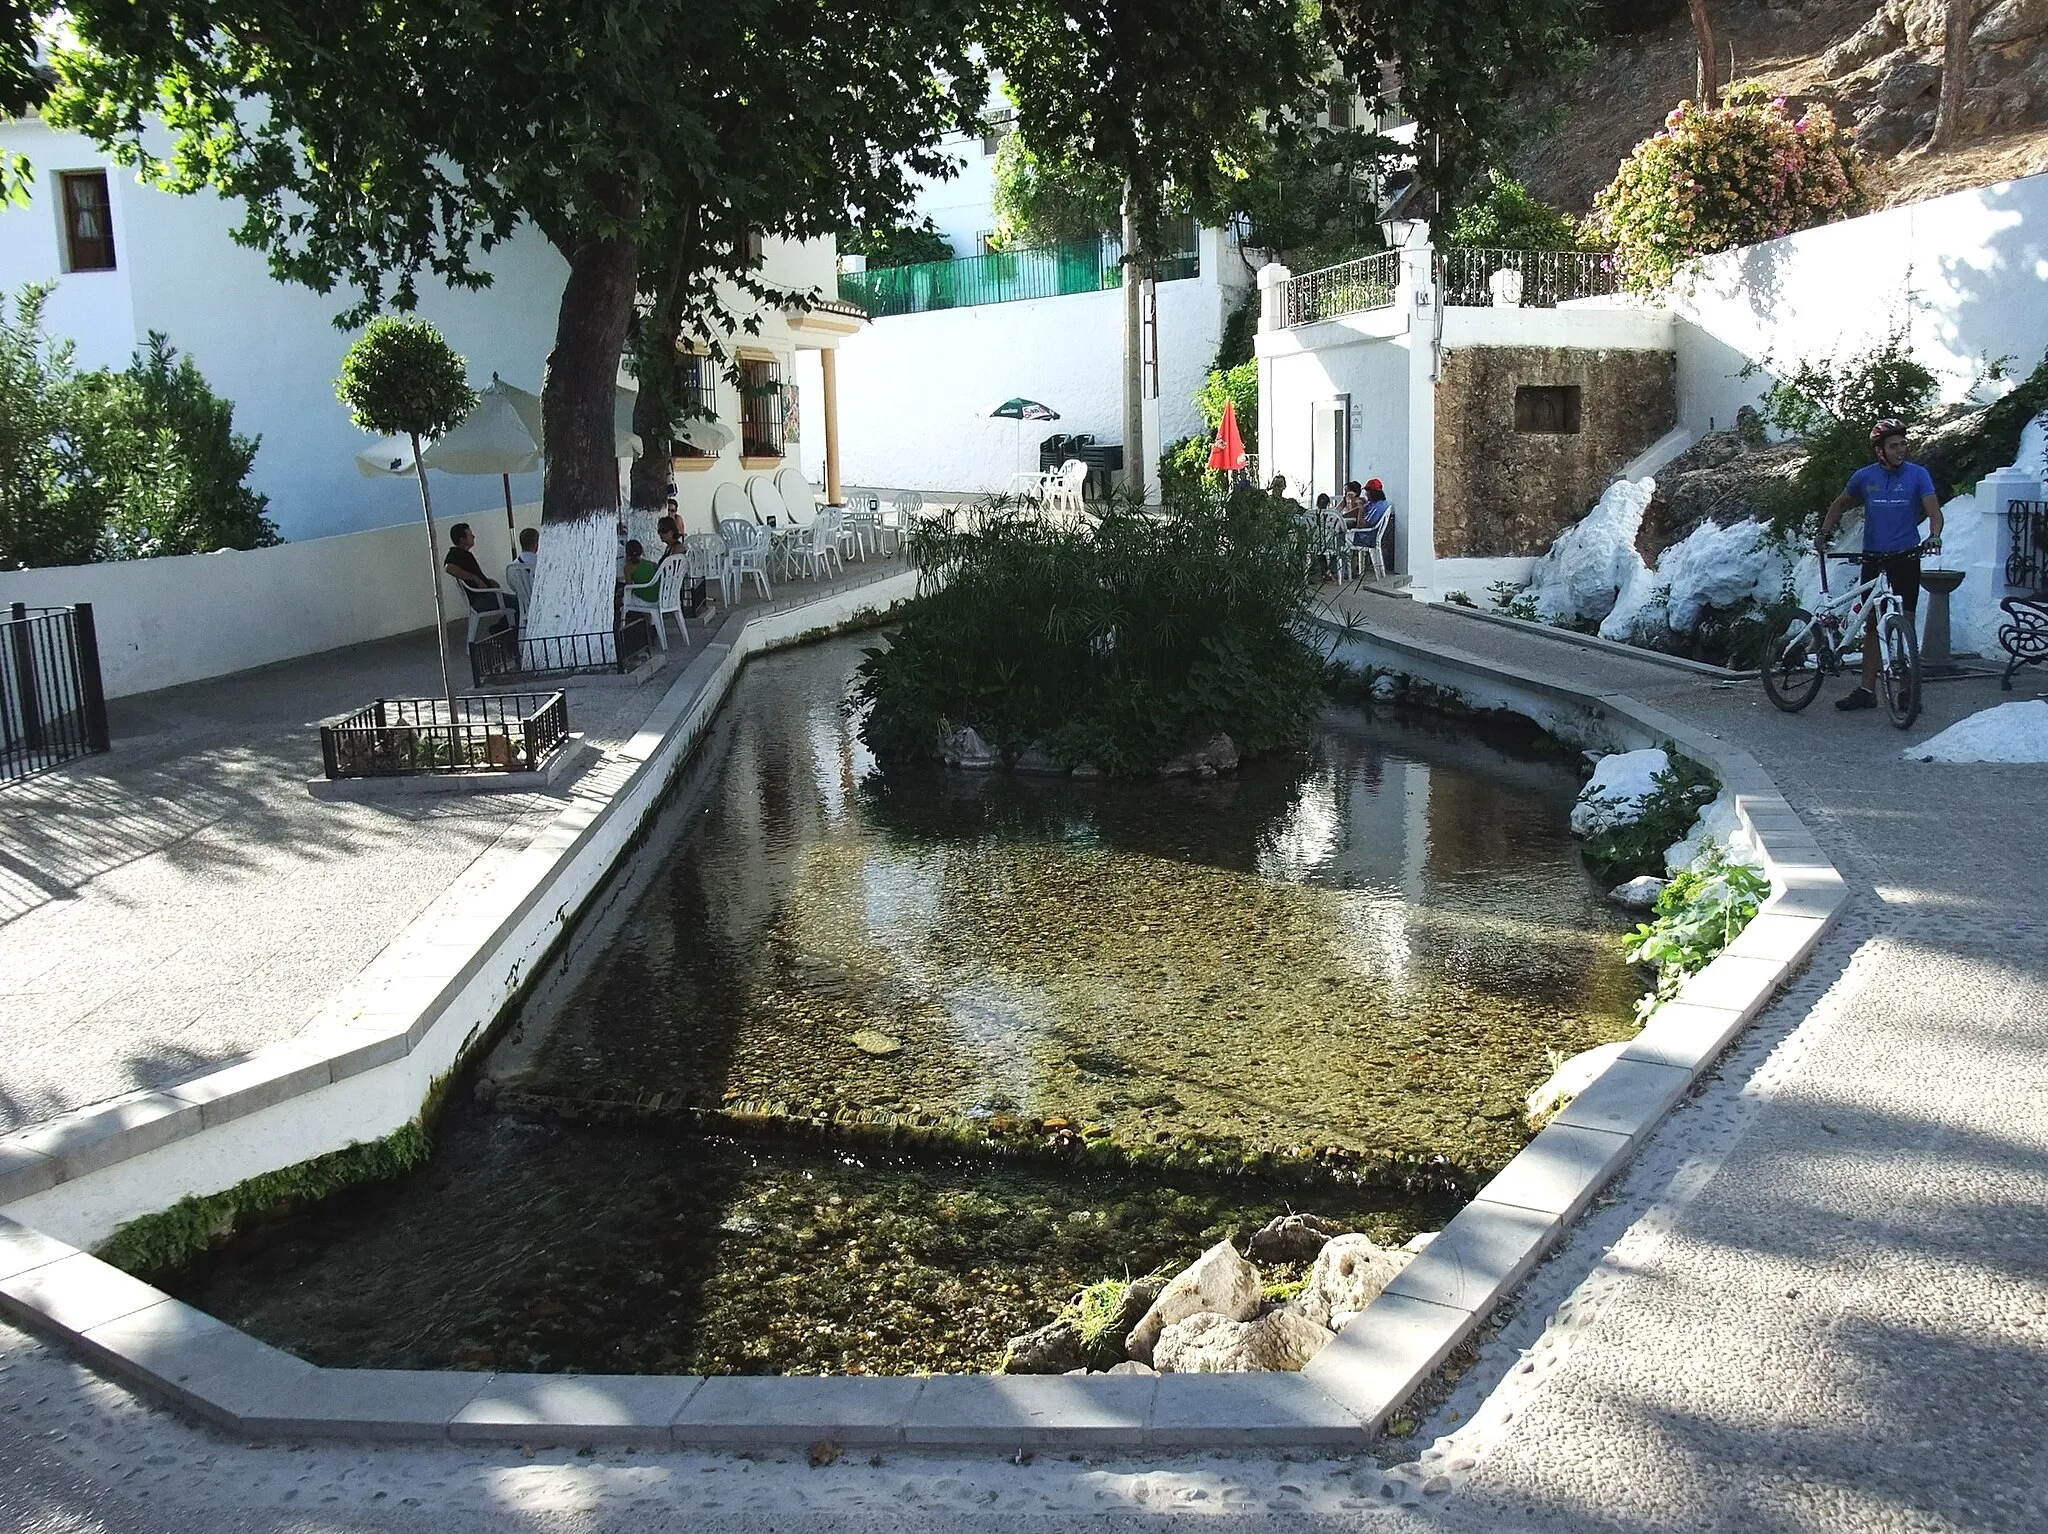 Photo showing: Center of Zagrilla, Province Córdoba in Andalusia, Spain. The water emerges from a karst spring "La Fuente" at the foot of the mountain (in the back).